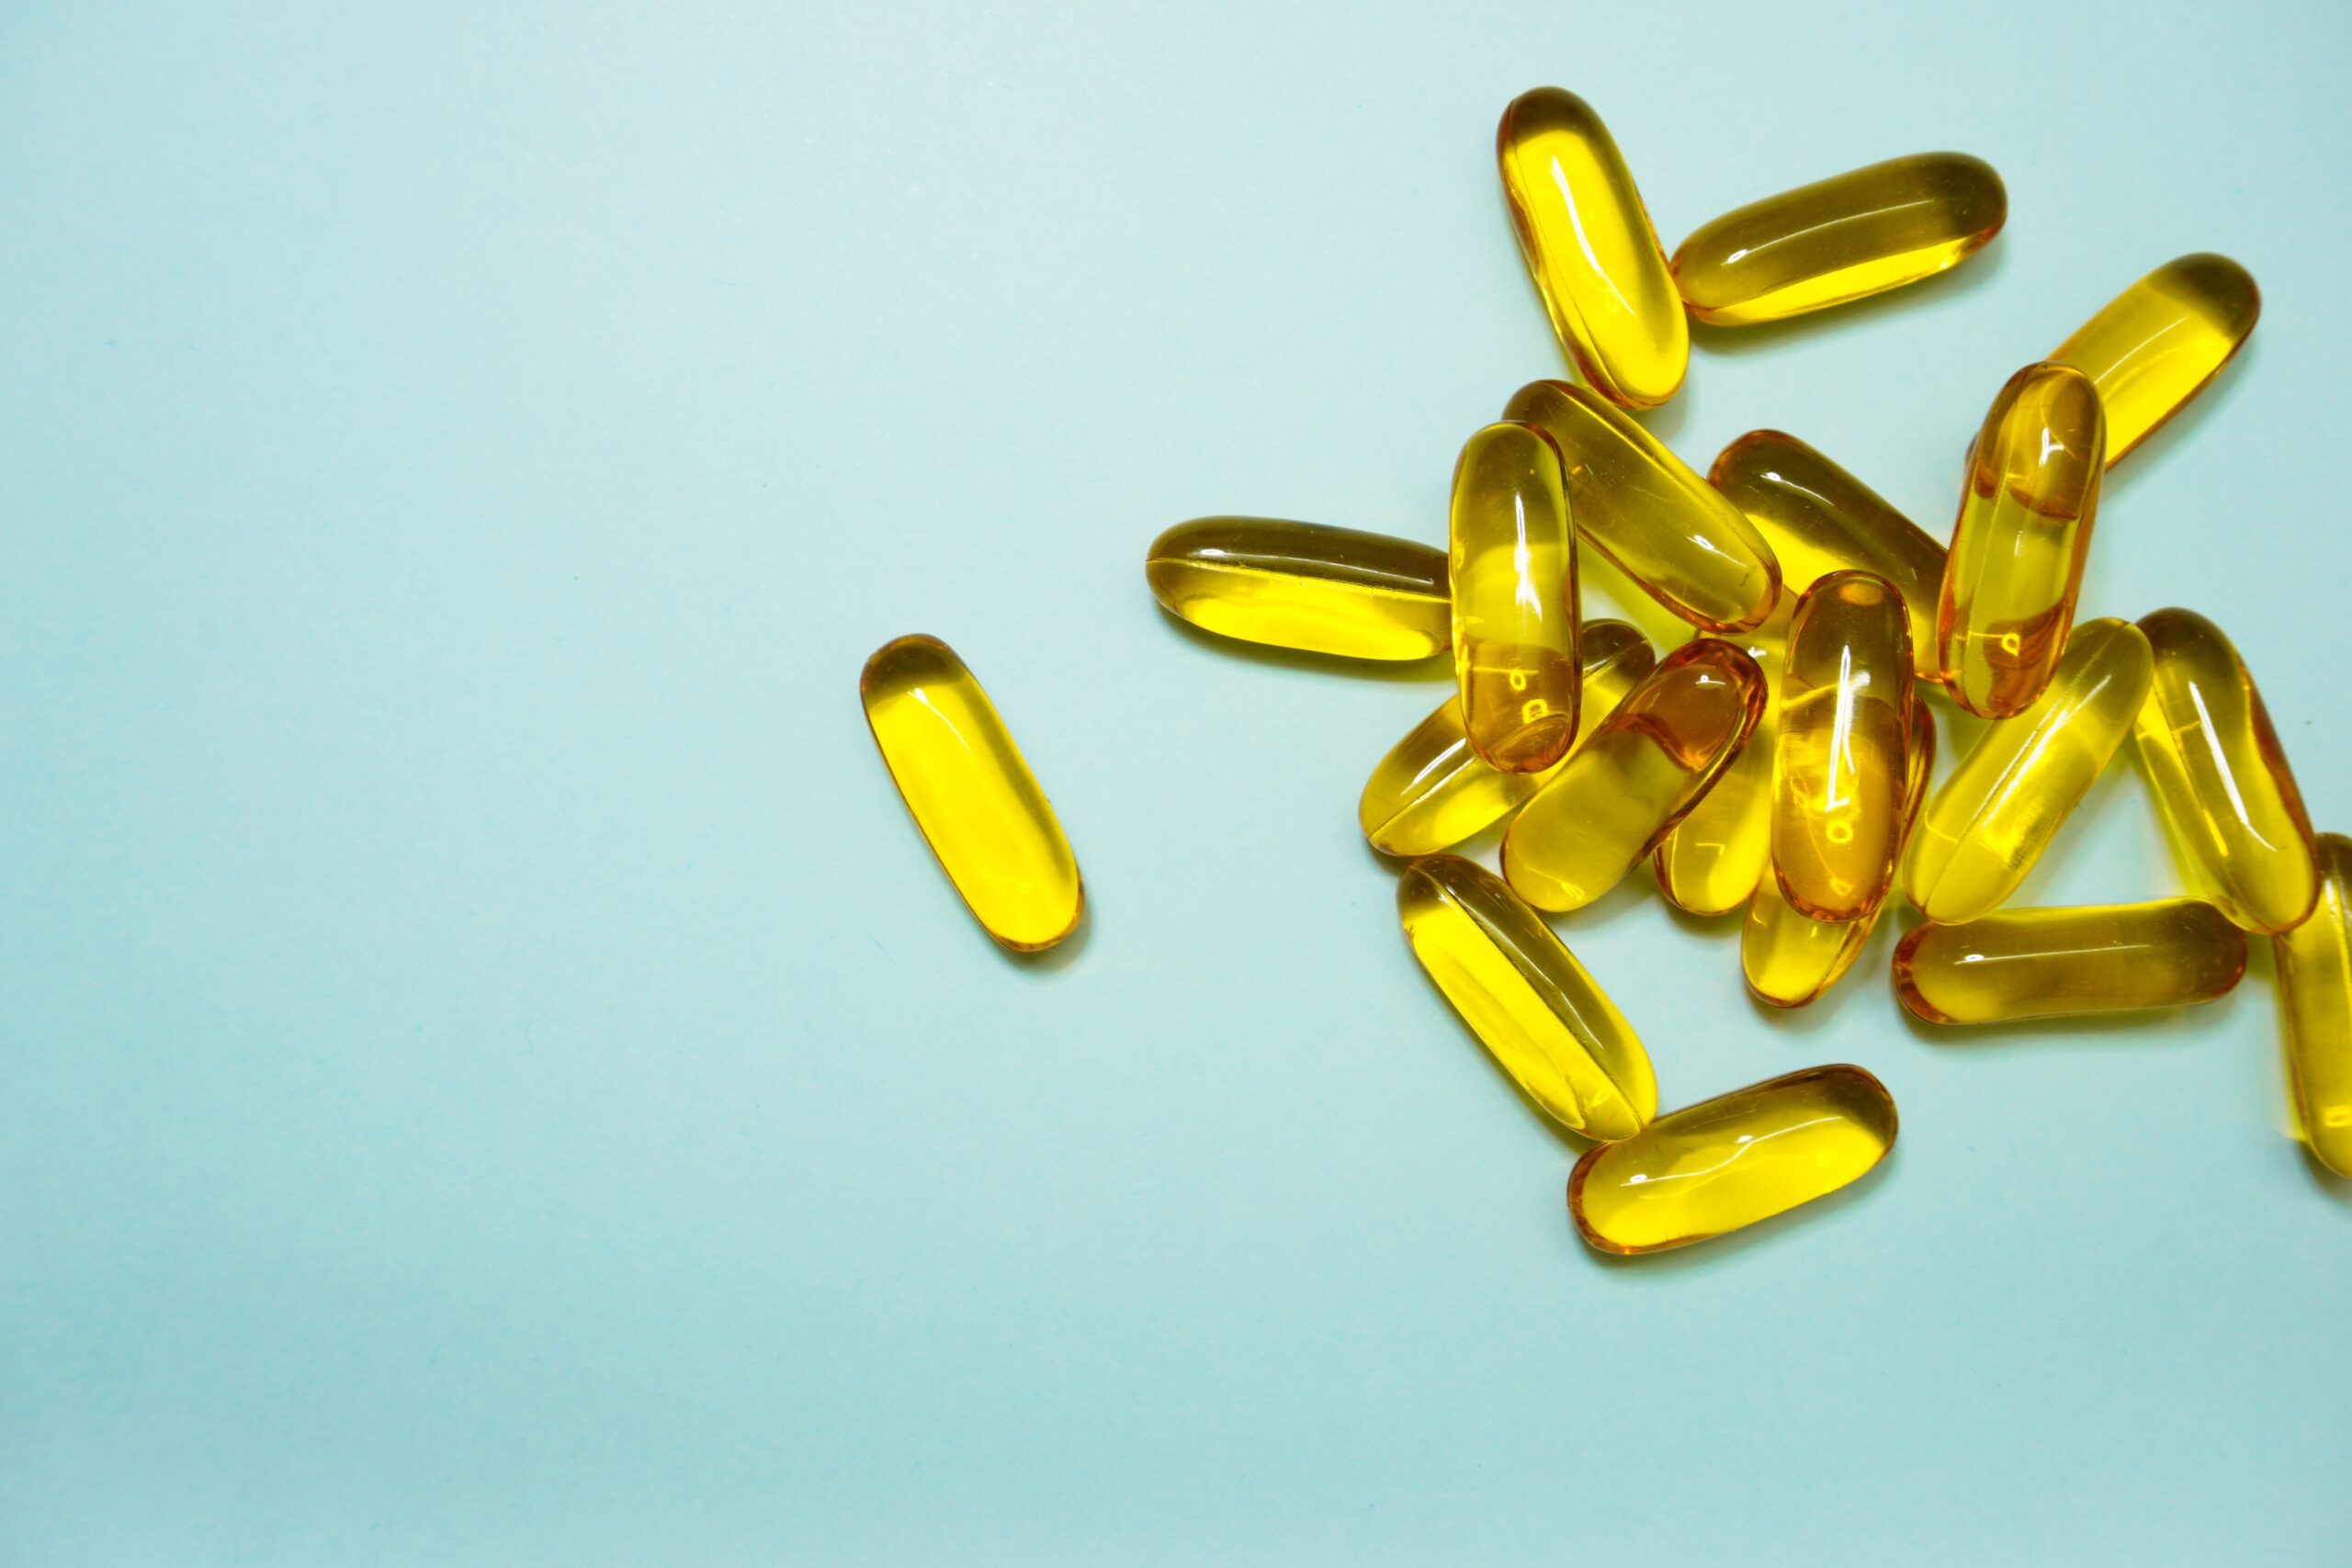 42. Can Supplements Help With Joint Pain?